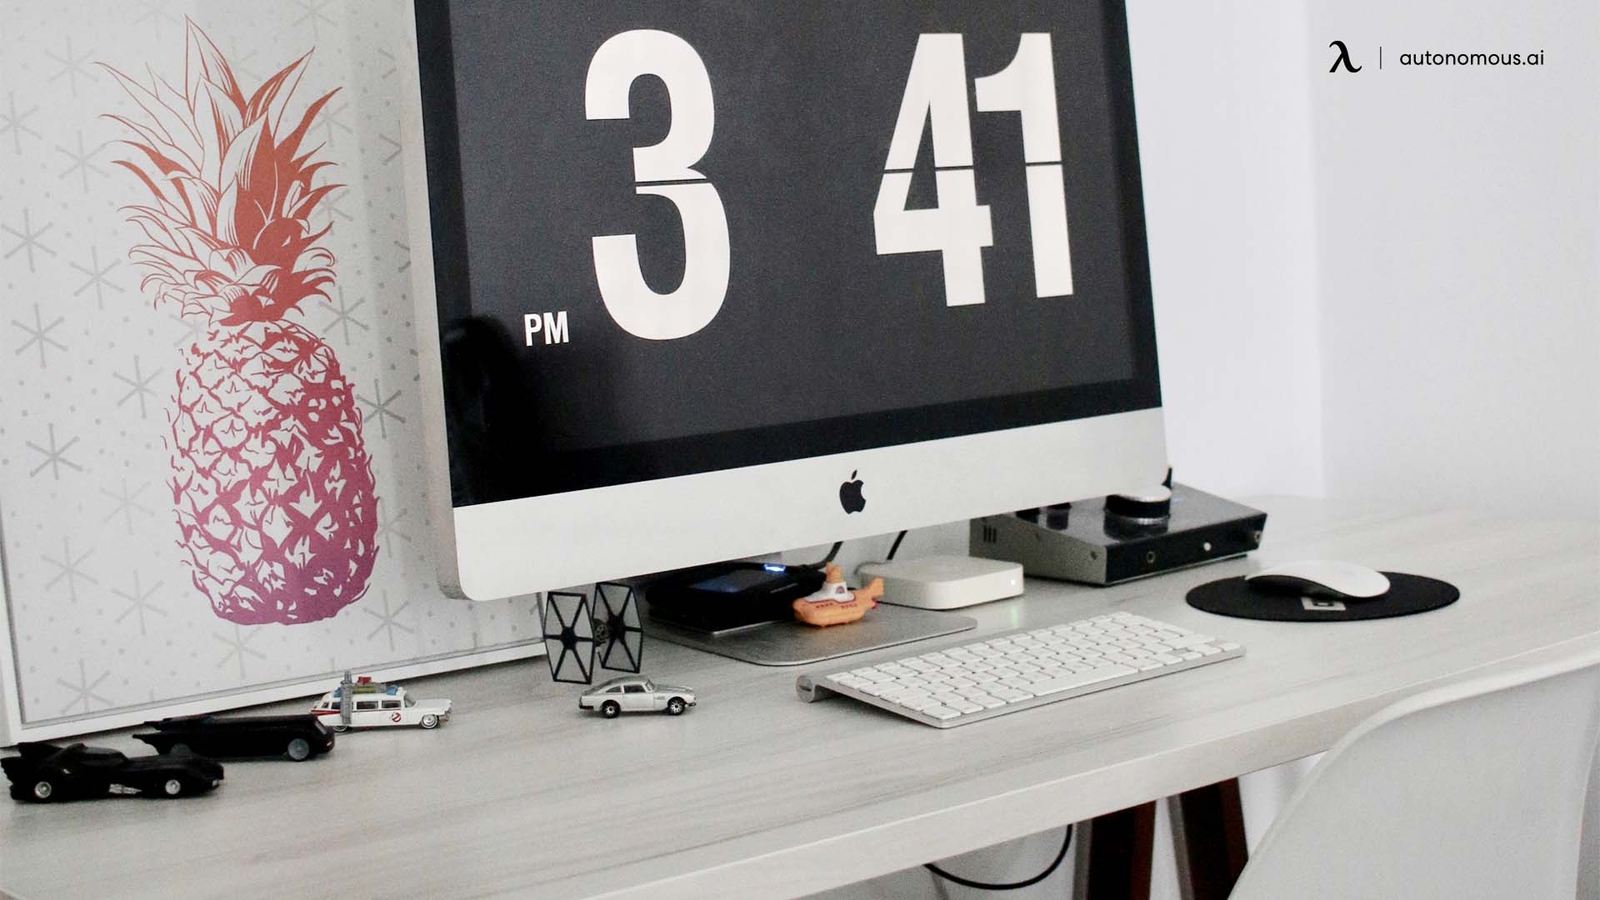 10 Computer Desk Setup Ideas Perfect for Small Home Office Space